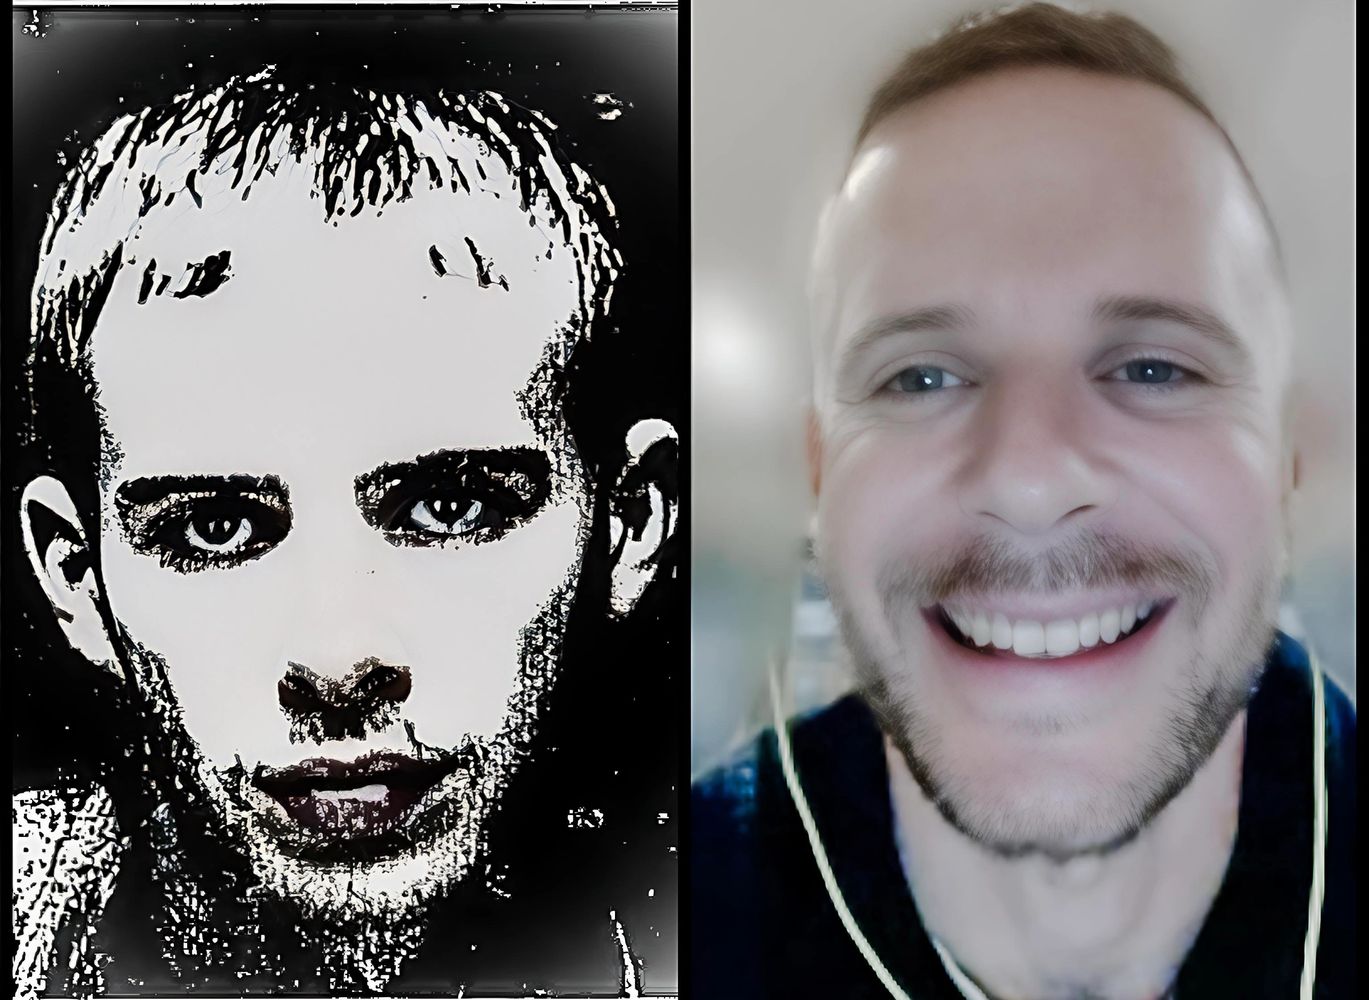 Aaron's initial booking photo from '04 vs him in '24 20 years of making positive life changes